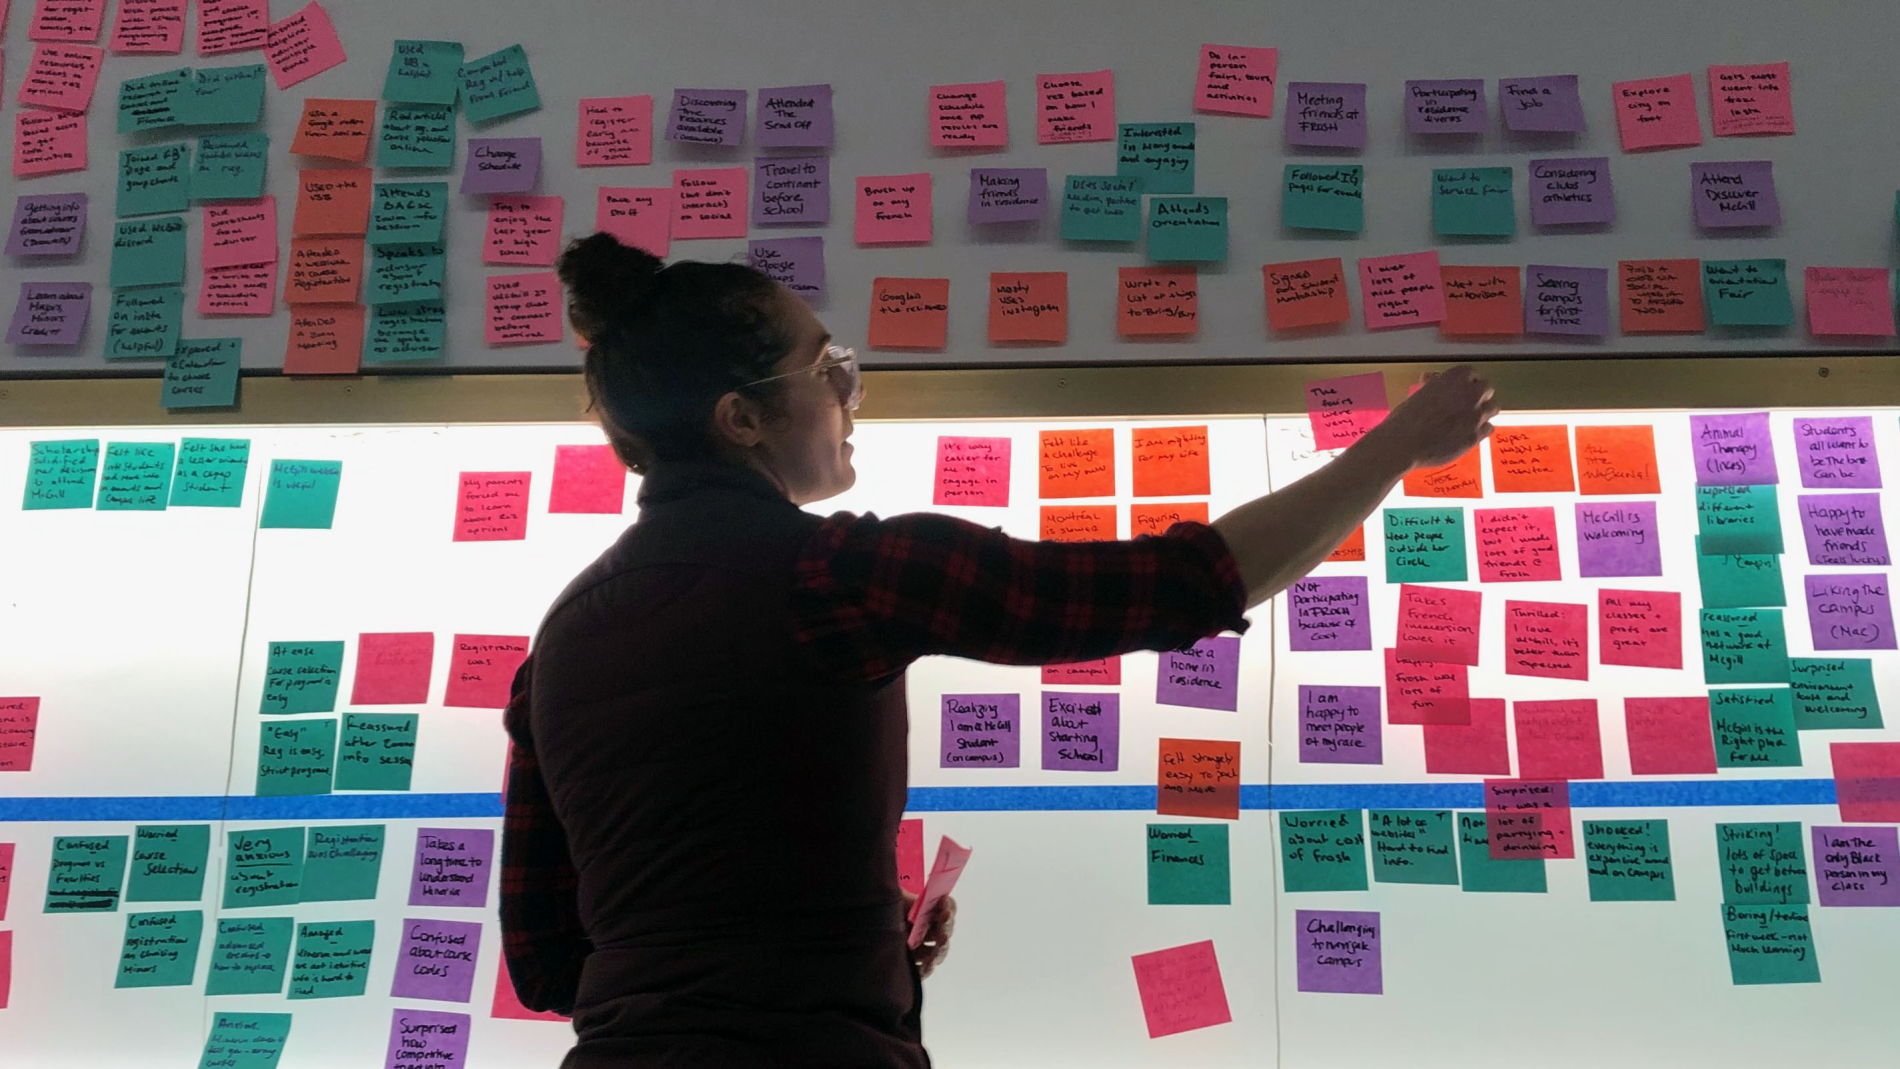 Heidi Strohl, Manager, Digital Design in from of an illuminated whiteboard filled will brightly coloured PostIt notes.